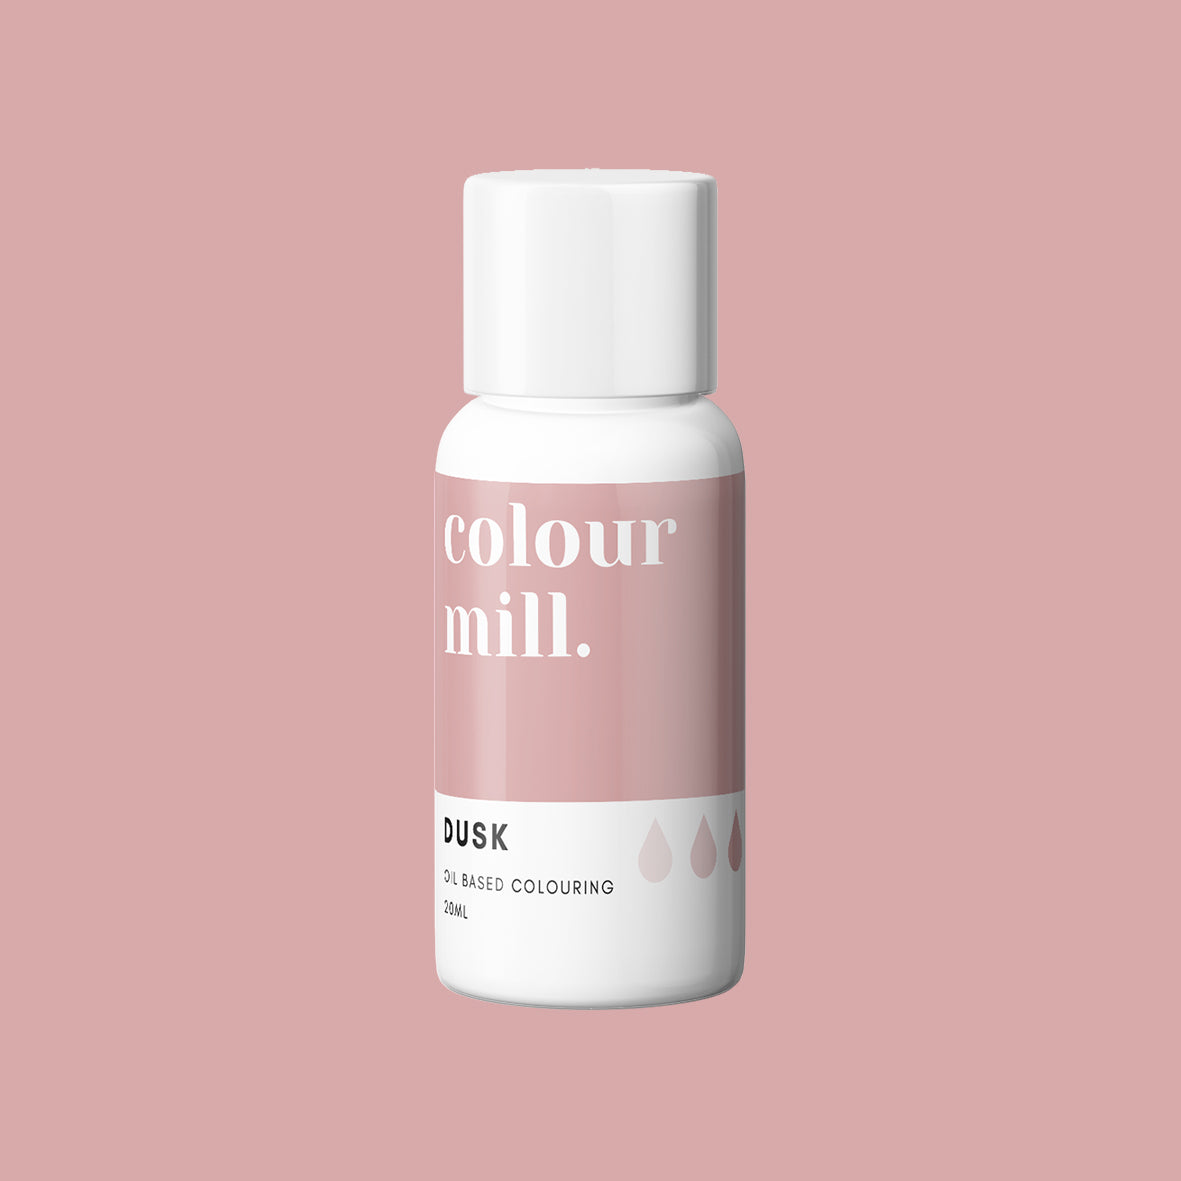 DUSK oil based concentrated icing colouring 20ml